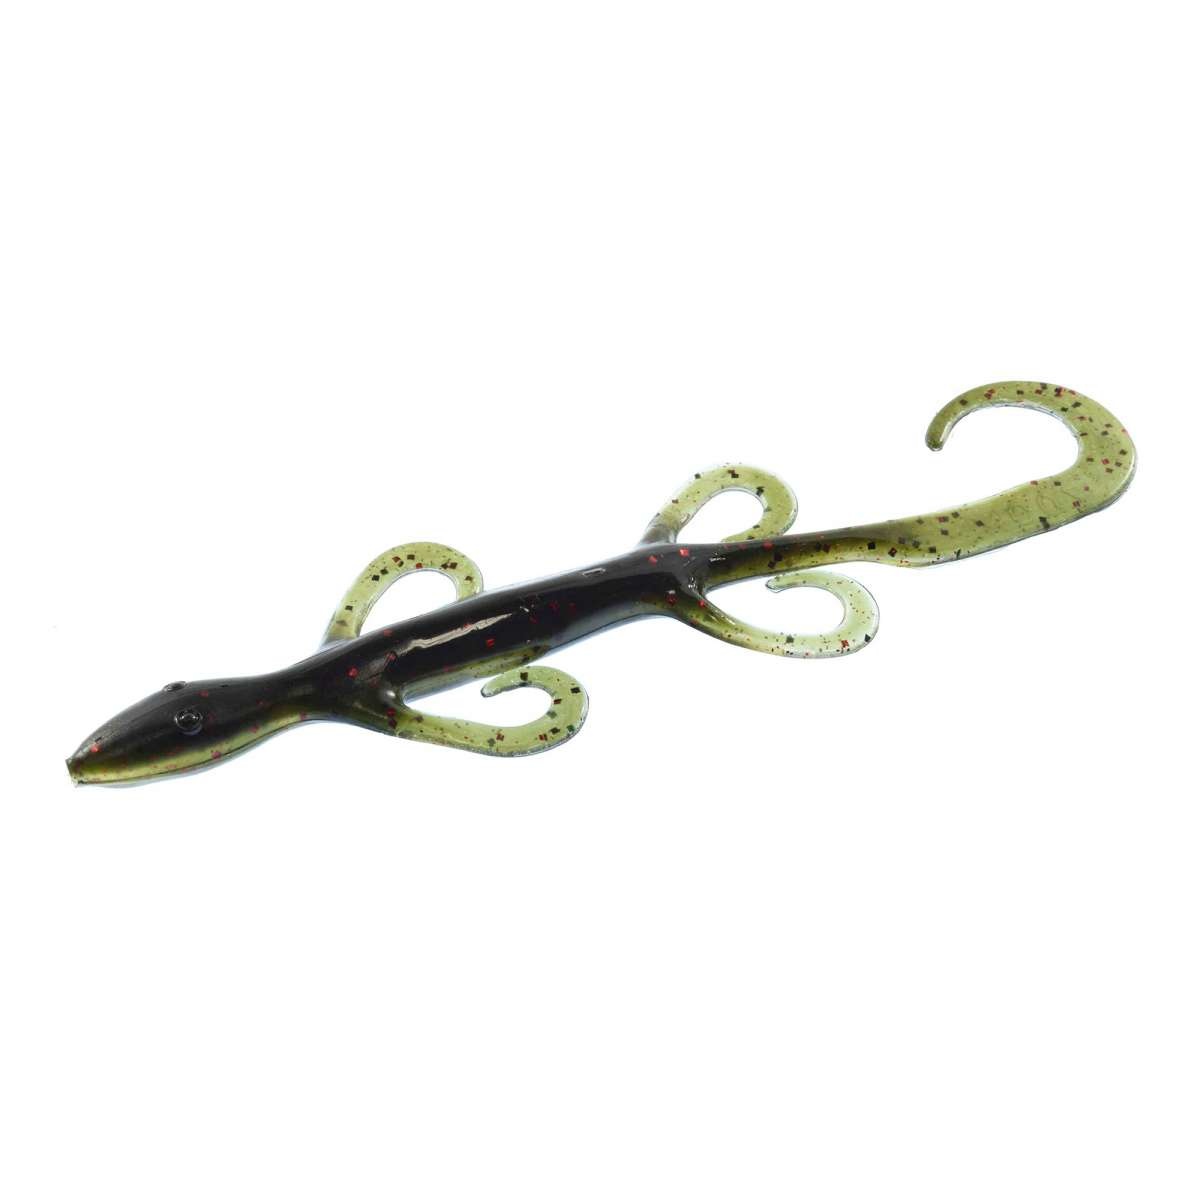 Zoom 6 in. Lizard 9-pk - Tackle Shack Outdoors